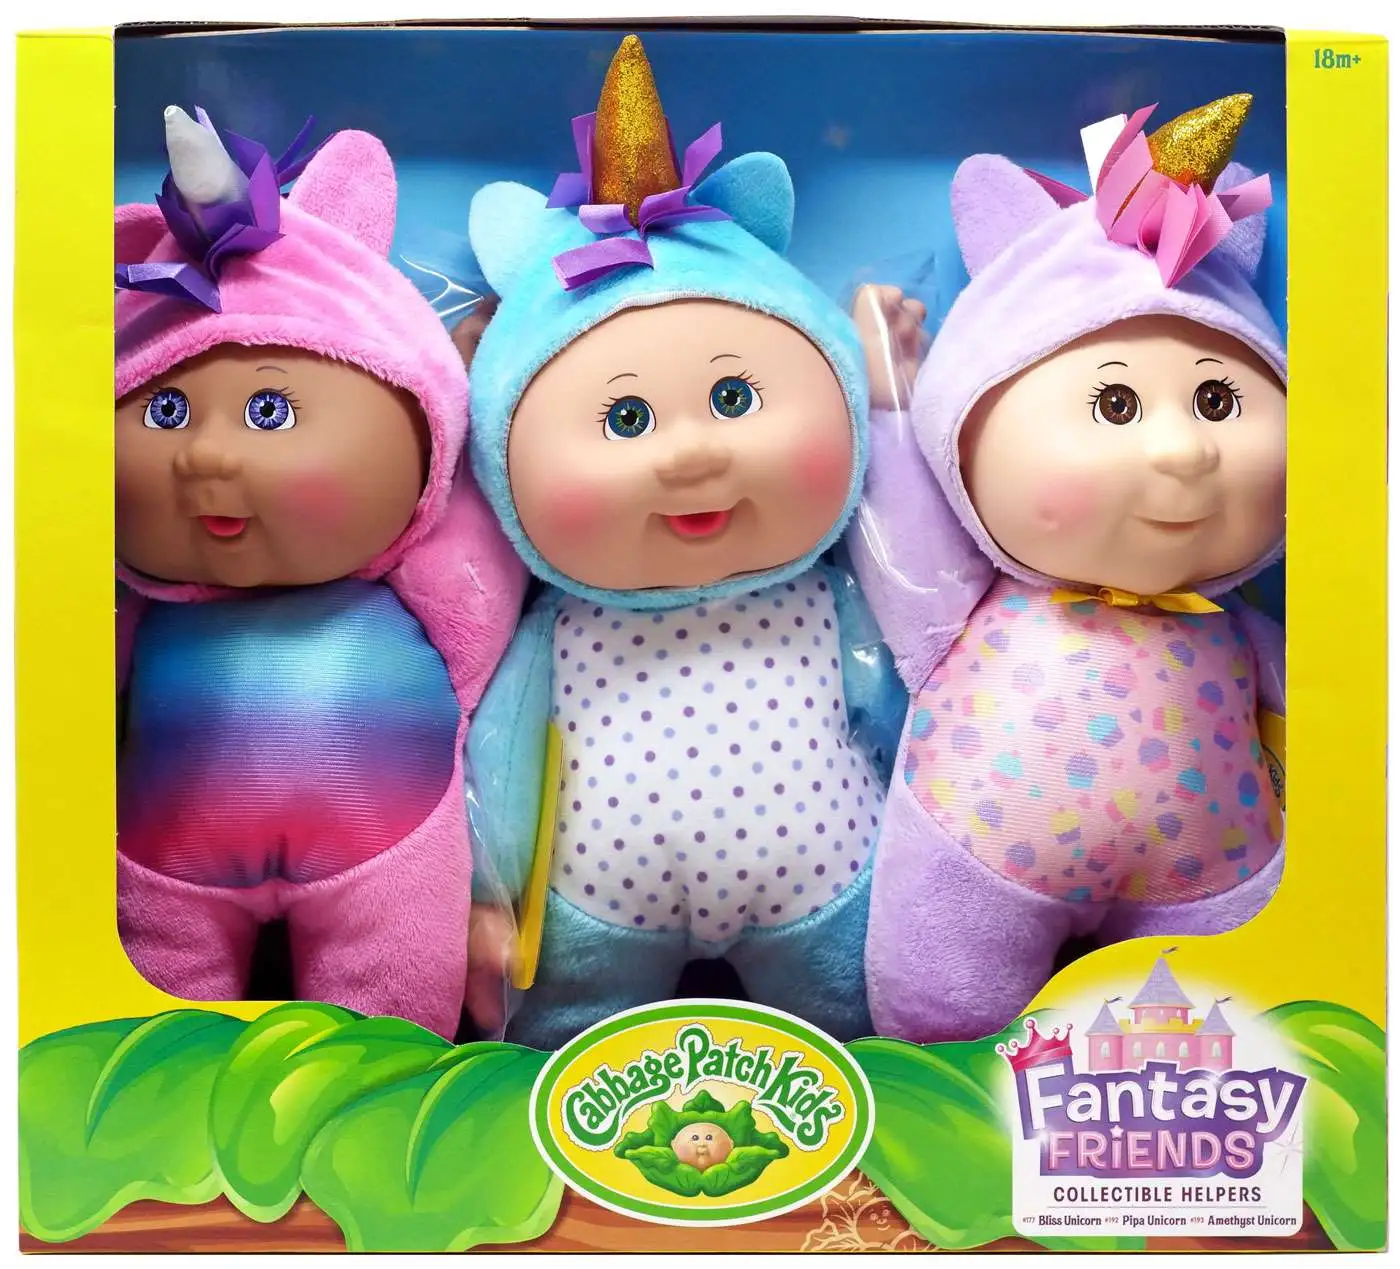 CABBAGE PATCH KIDS 9" CUTIES FANTASY FRIENDS 3 PACK UNICORN DOLL SET 